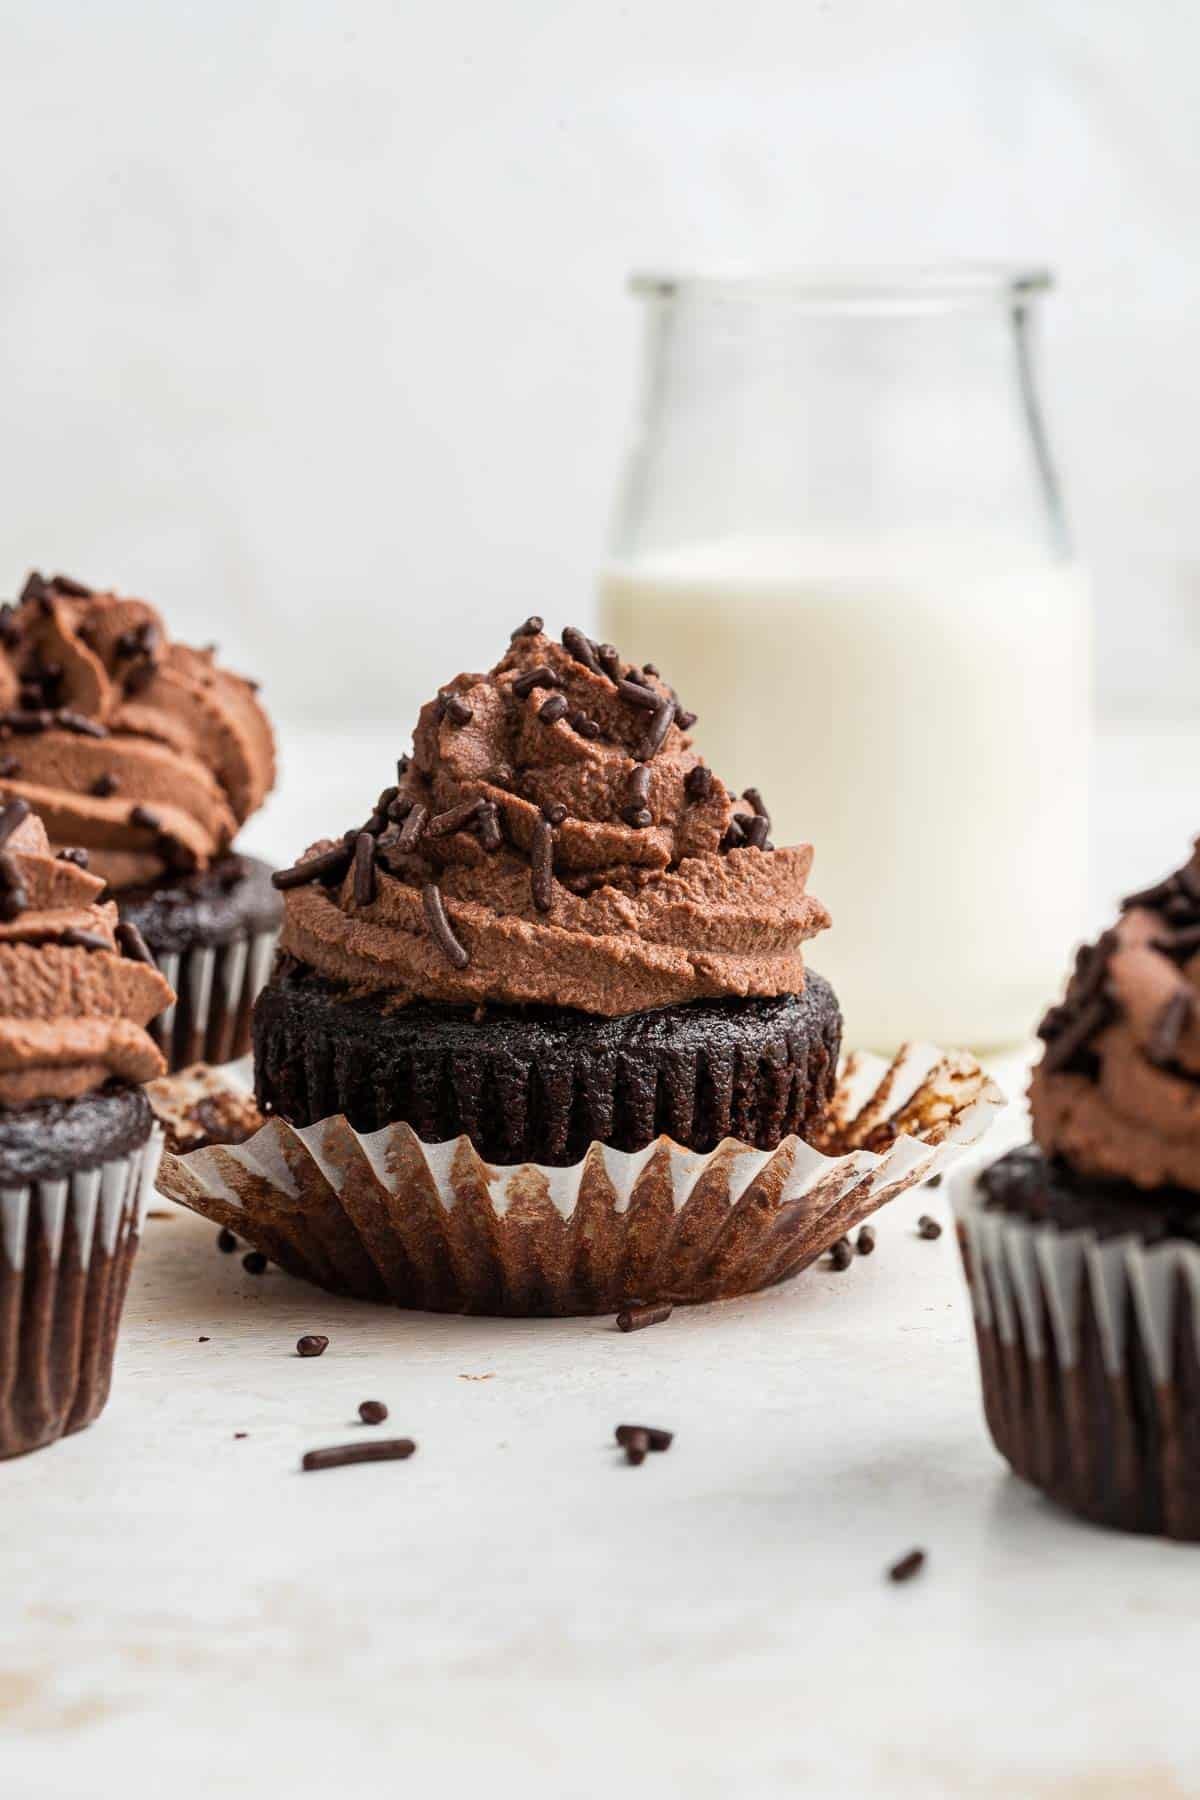 Four chocolate cupcakes in front of a glass of milk.